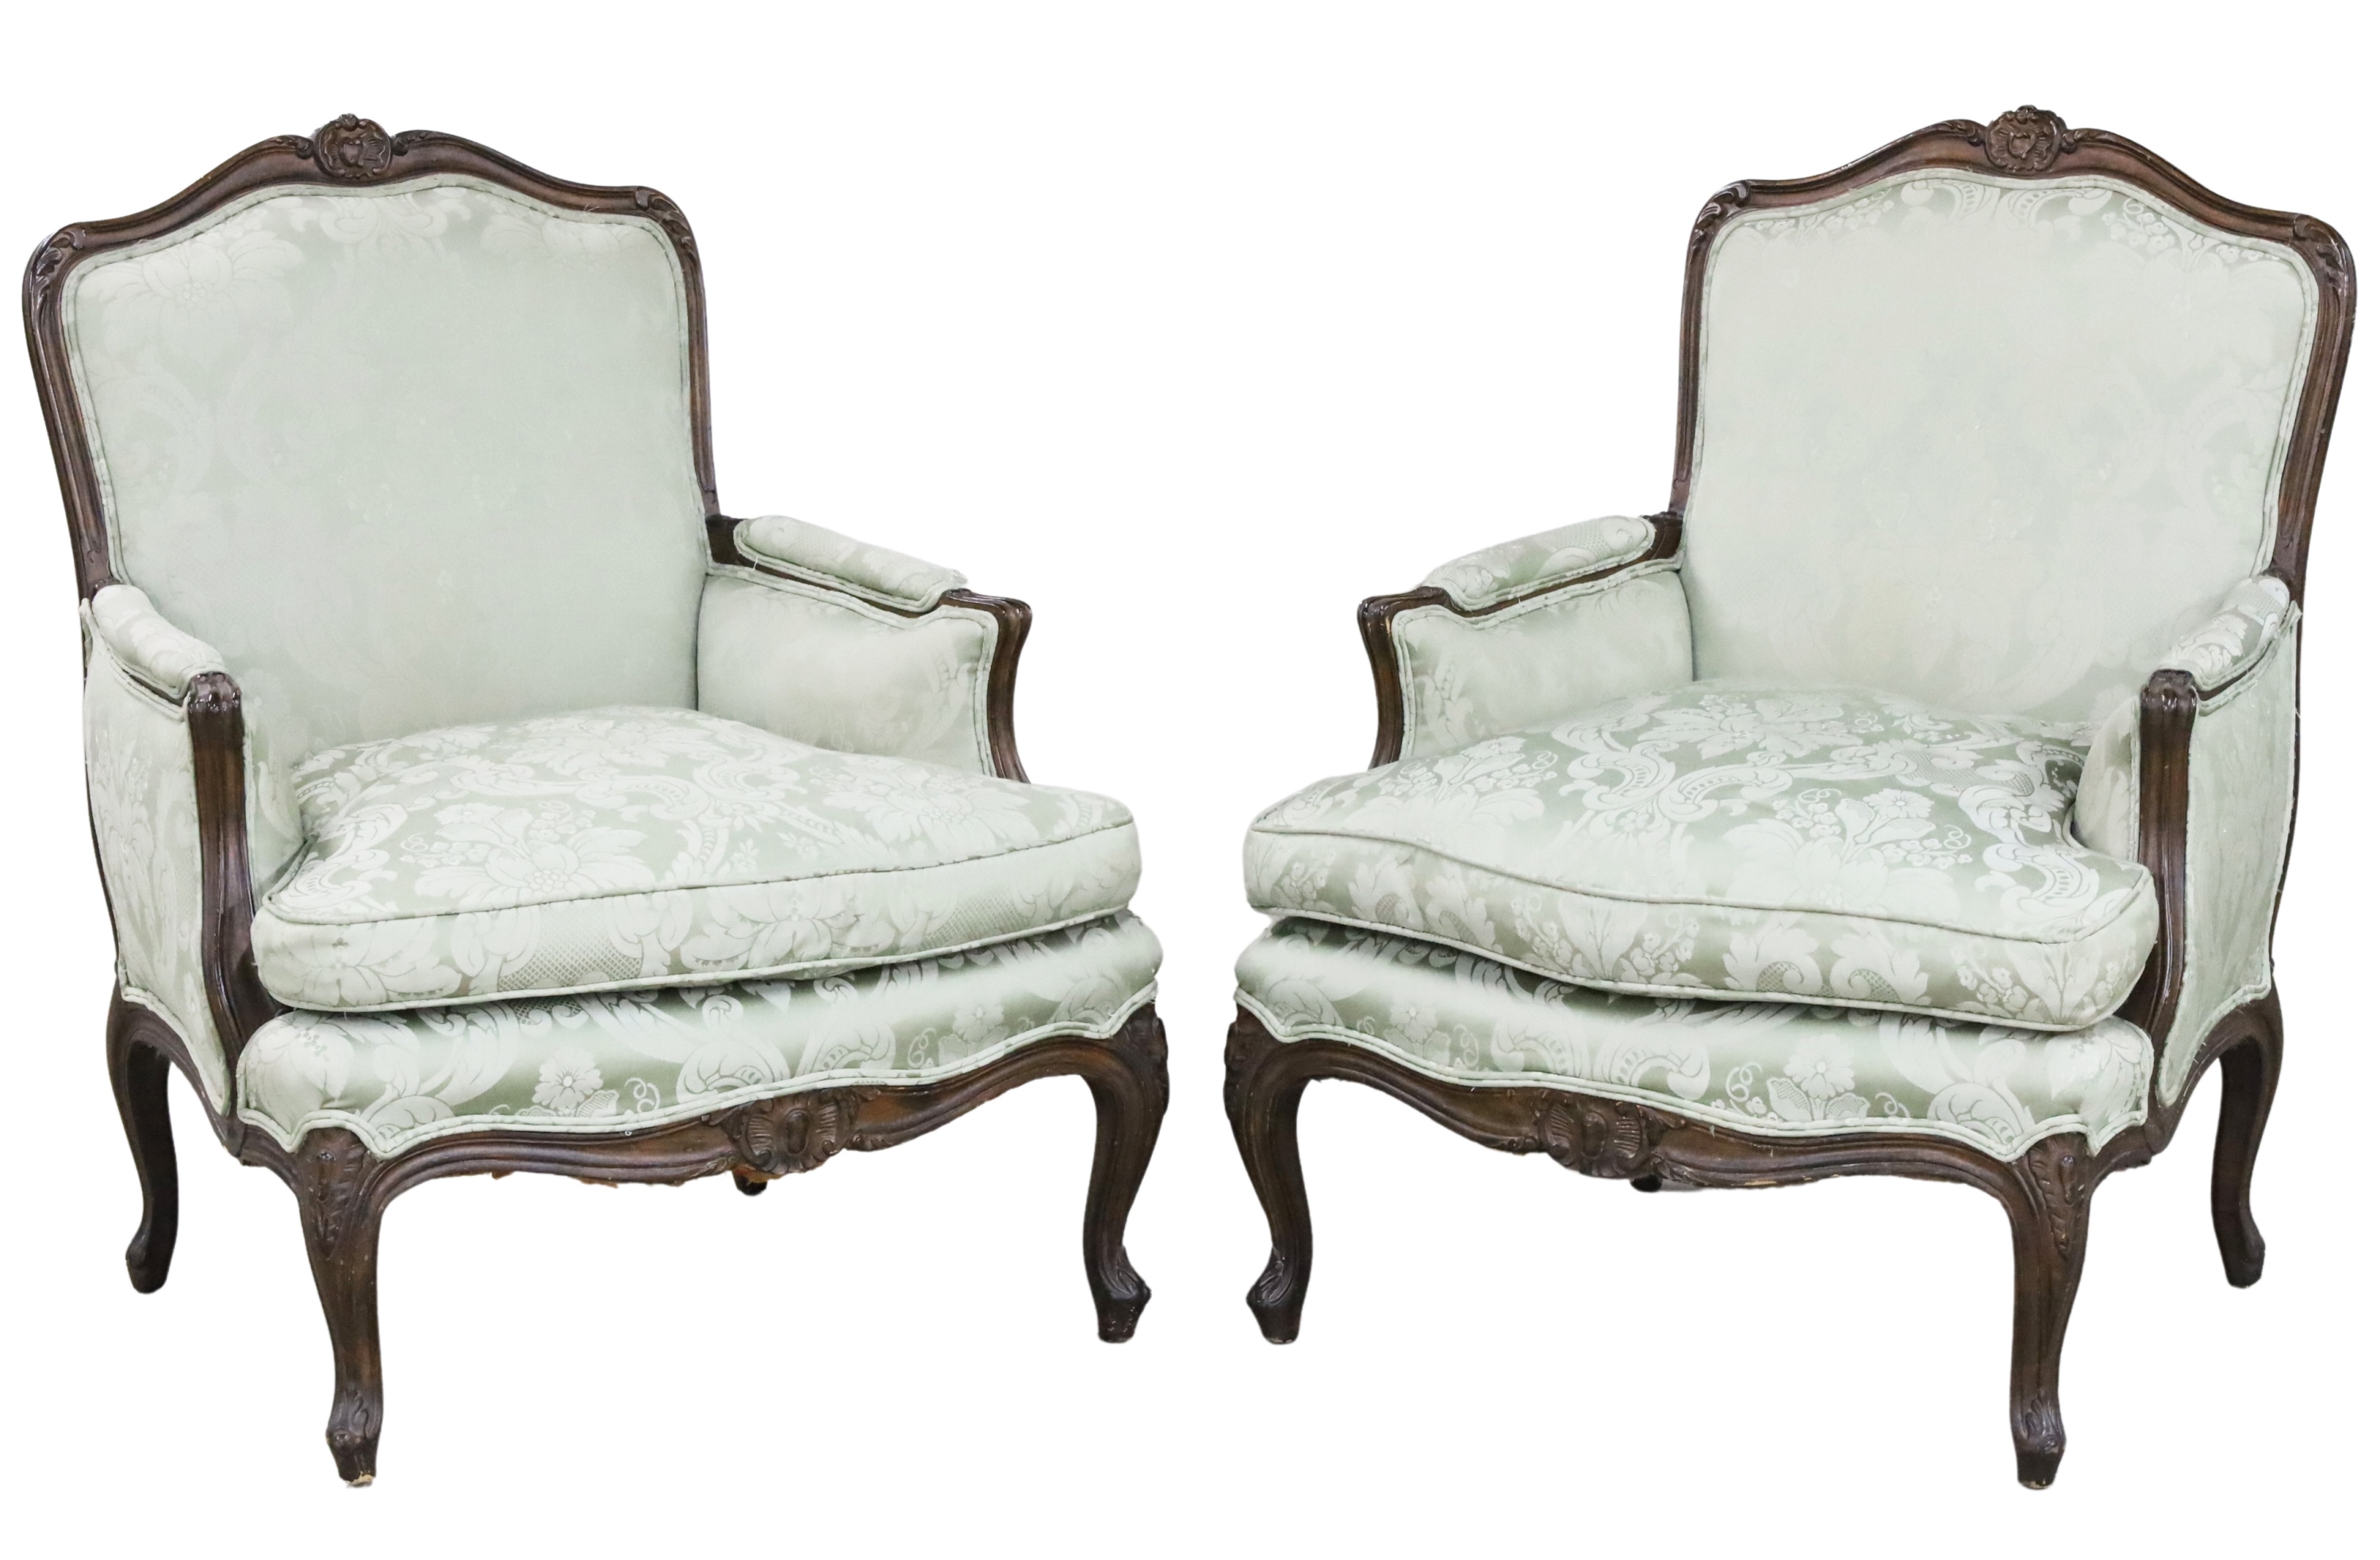 LOUIS XV STYLE BERGERES A pair 2f8d60